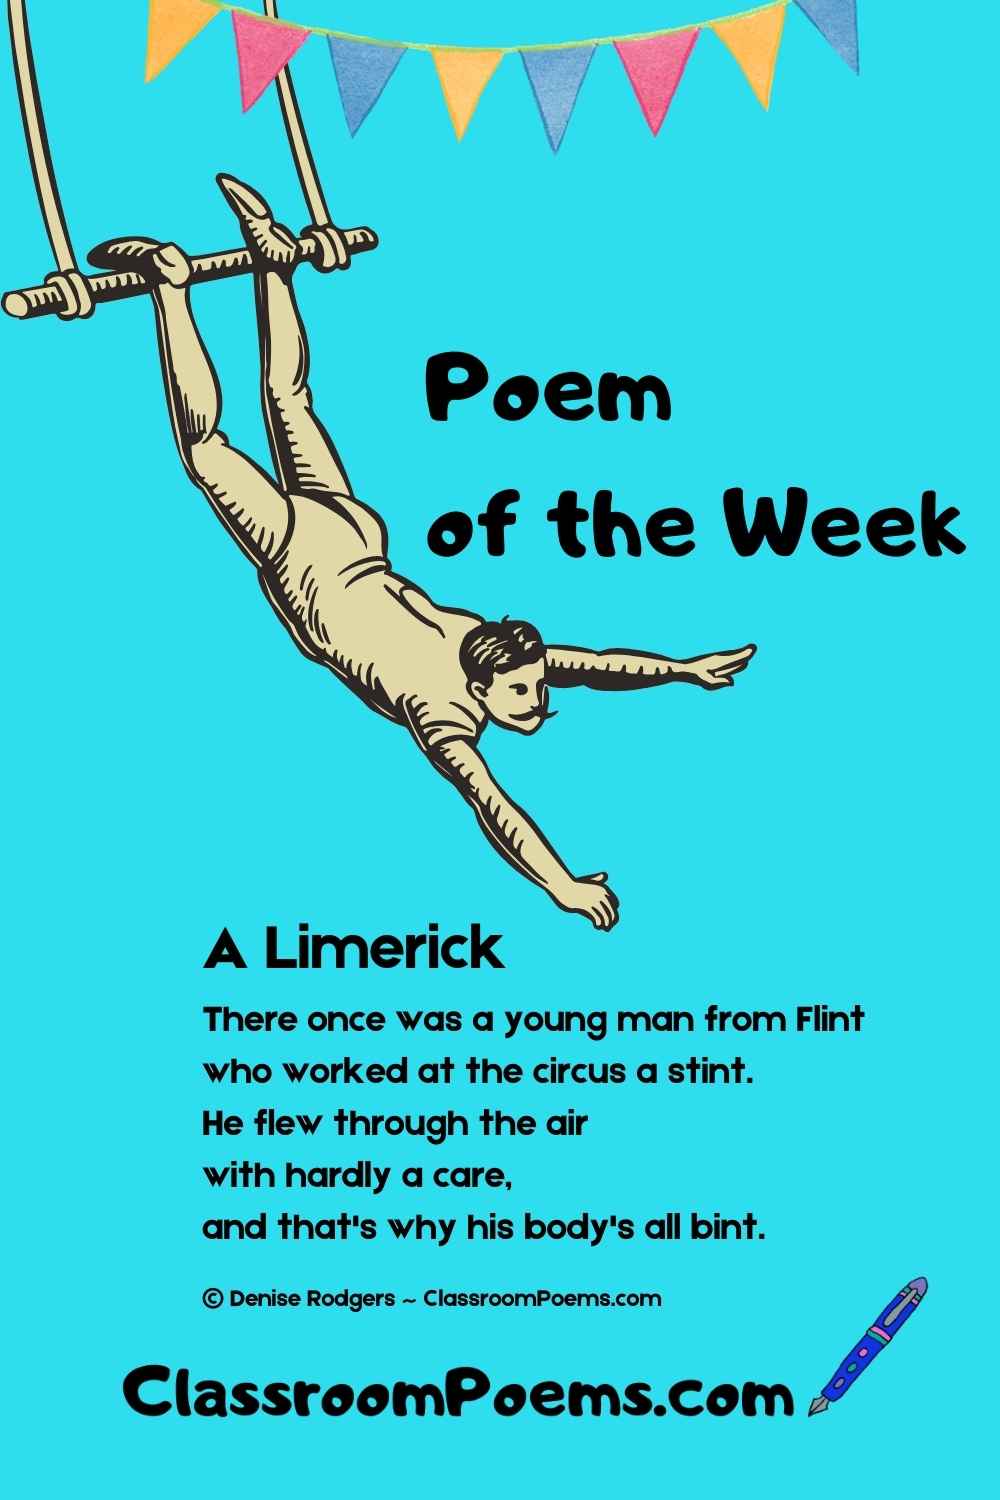 Limericks by Denise Rodgers on ClassroomPoems.com.